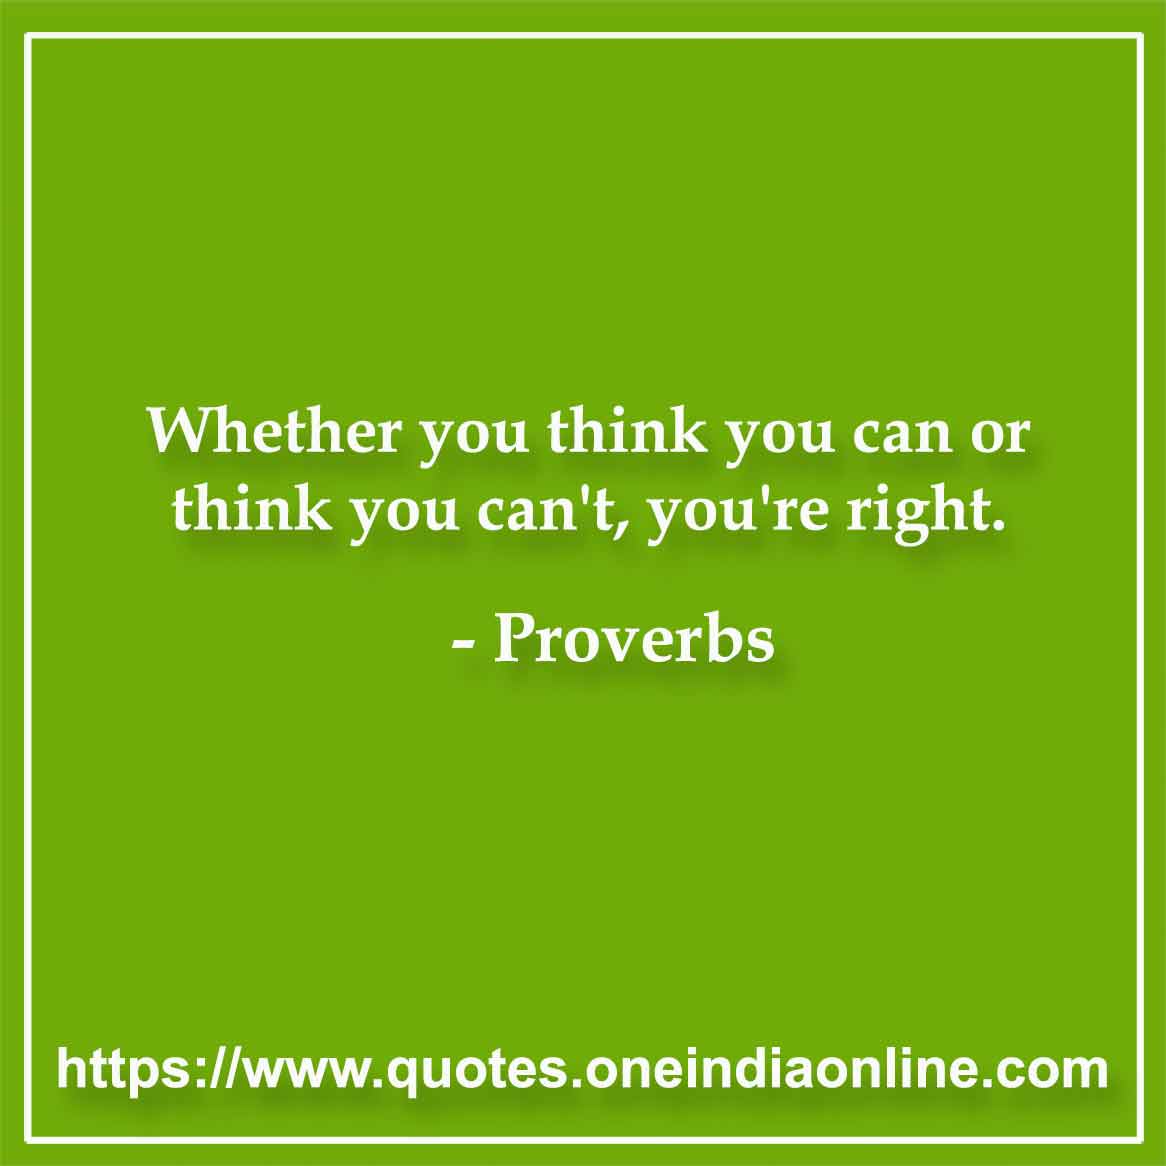 Whether you think you can or think you can't, you're right.

Eskimo 